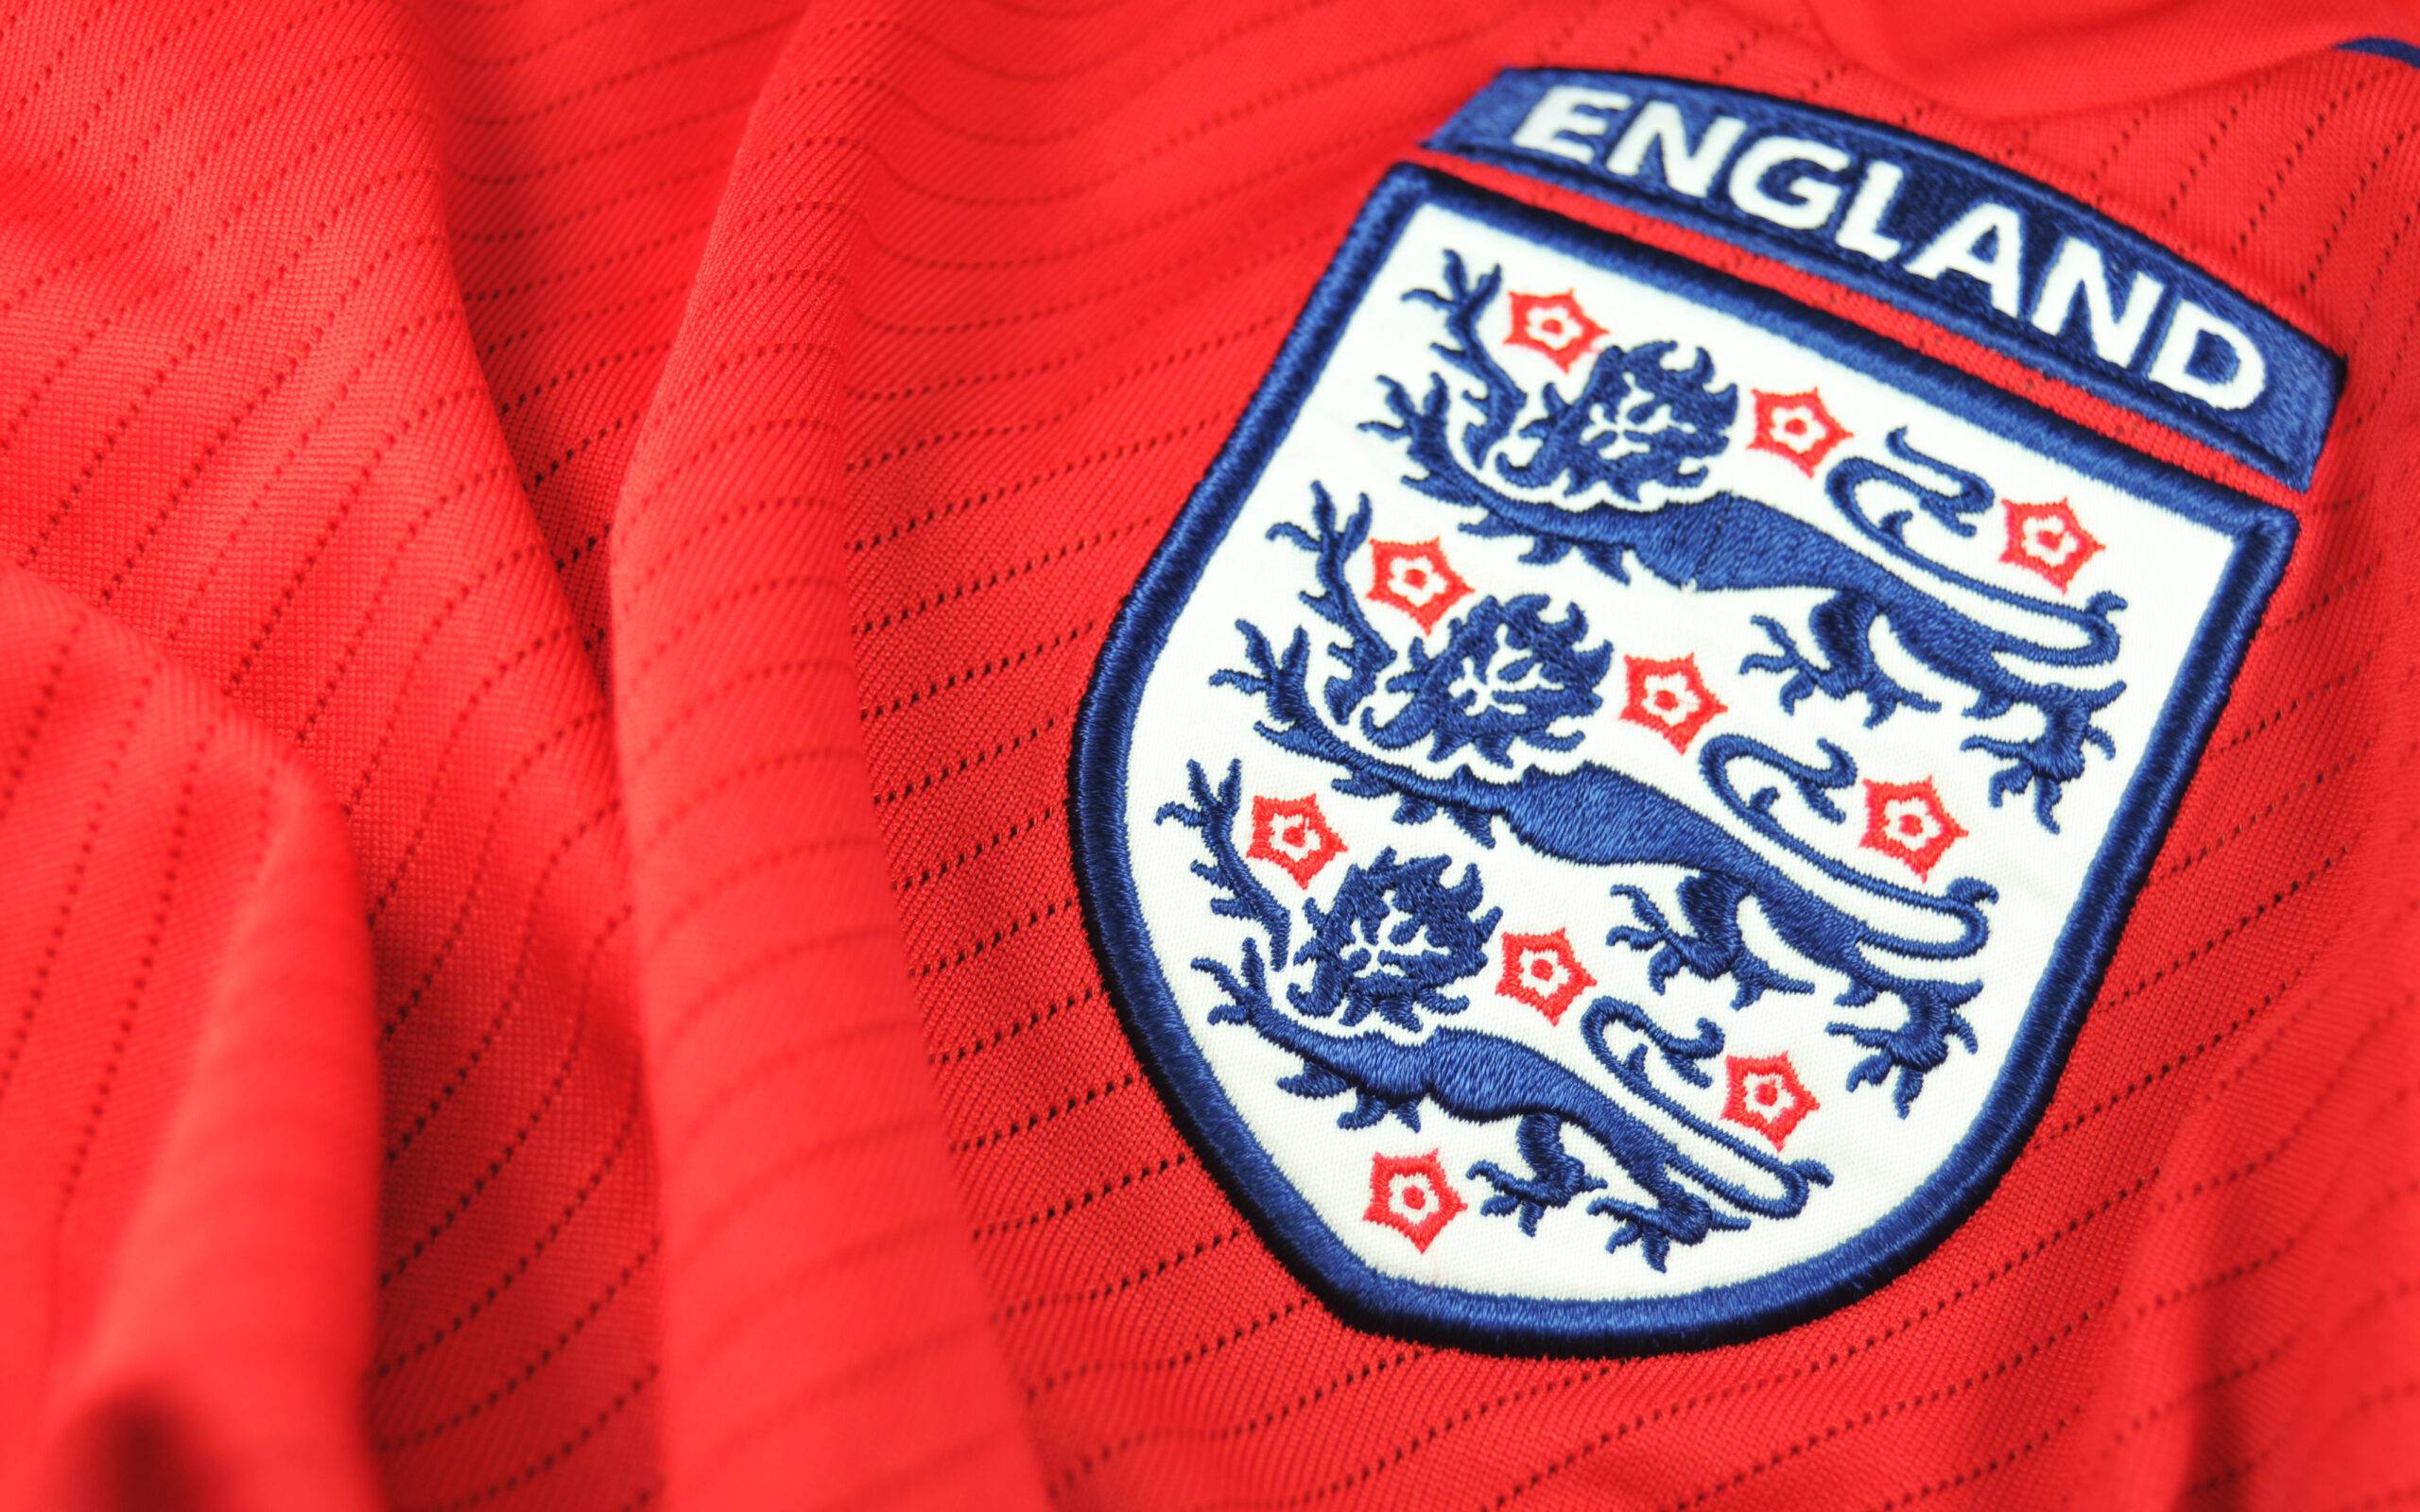 England crest on red kit